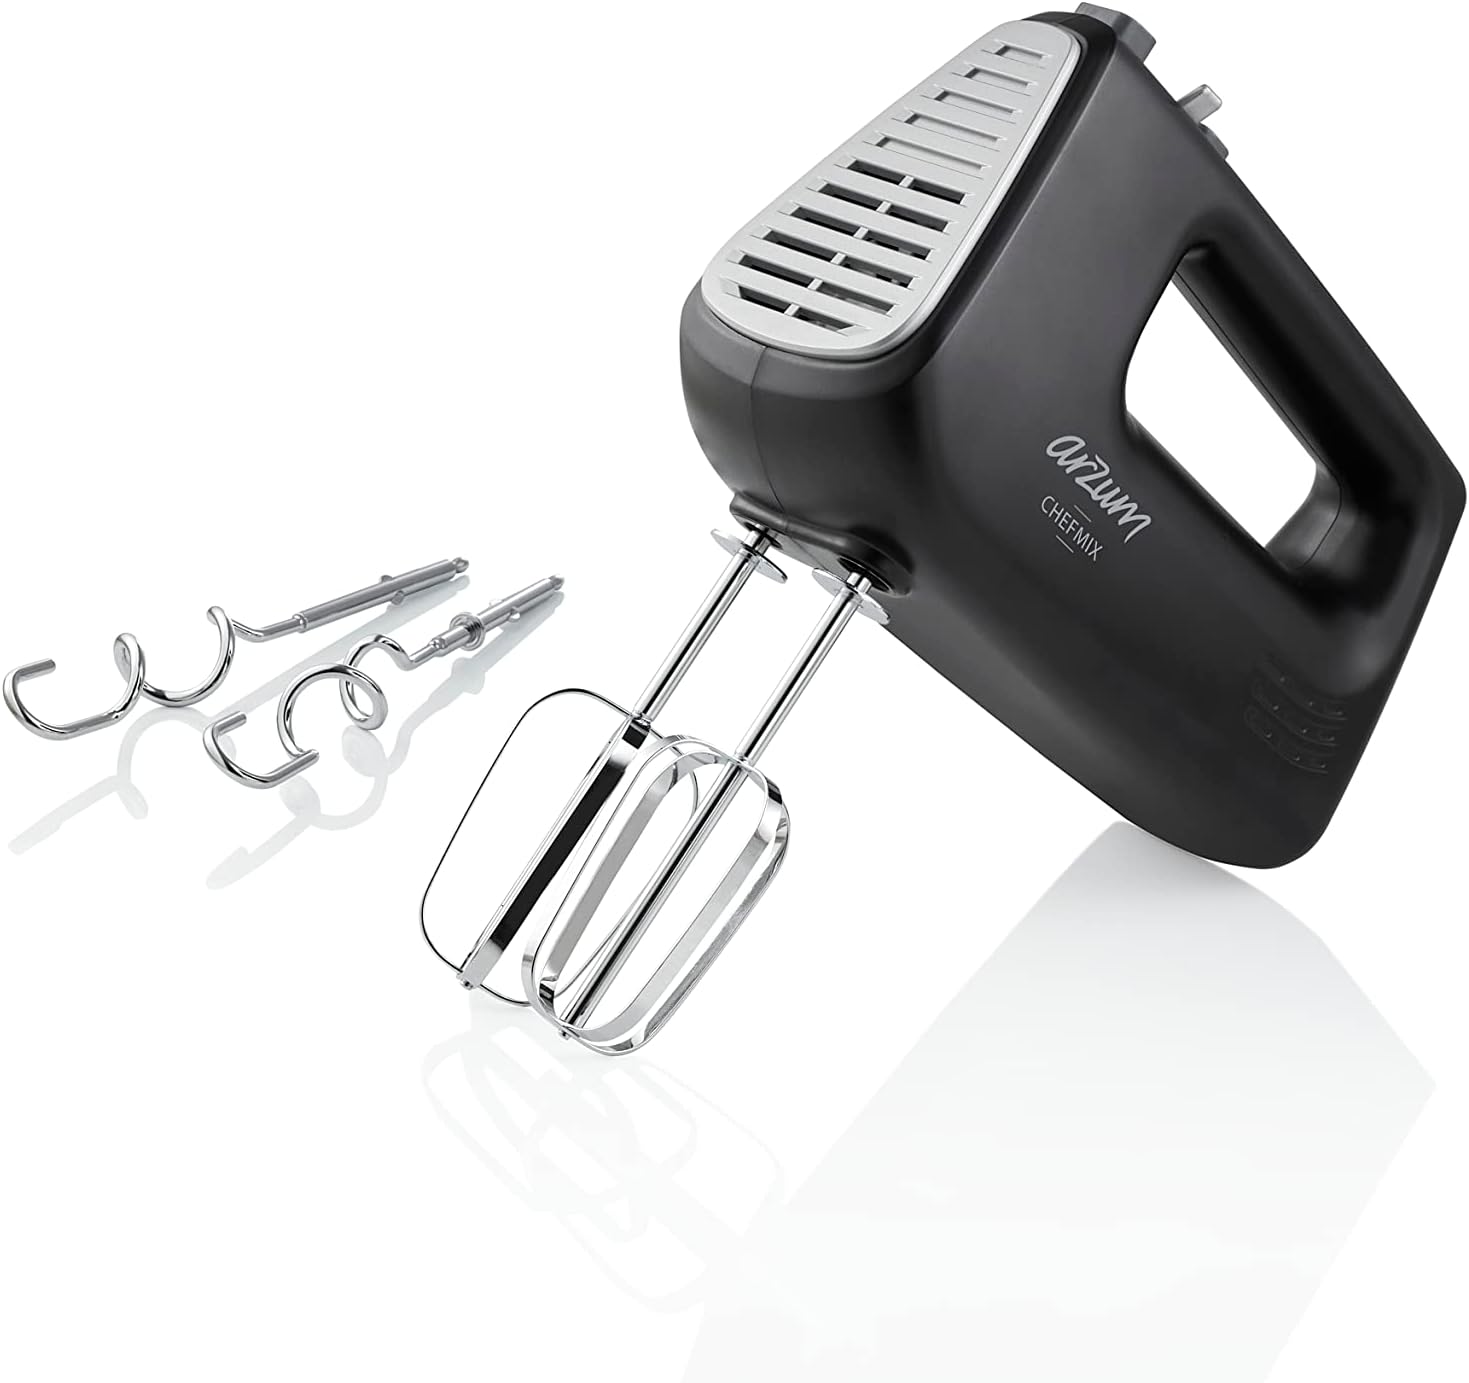 AR1163 ARZUM CHEFMIX MIXER, beater and dough hooks, 5-Stage Speed, Turbo Function, easy to clean, 400 W motor power